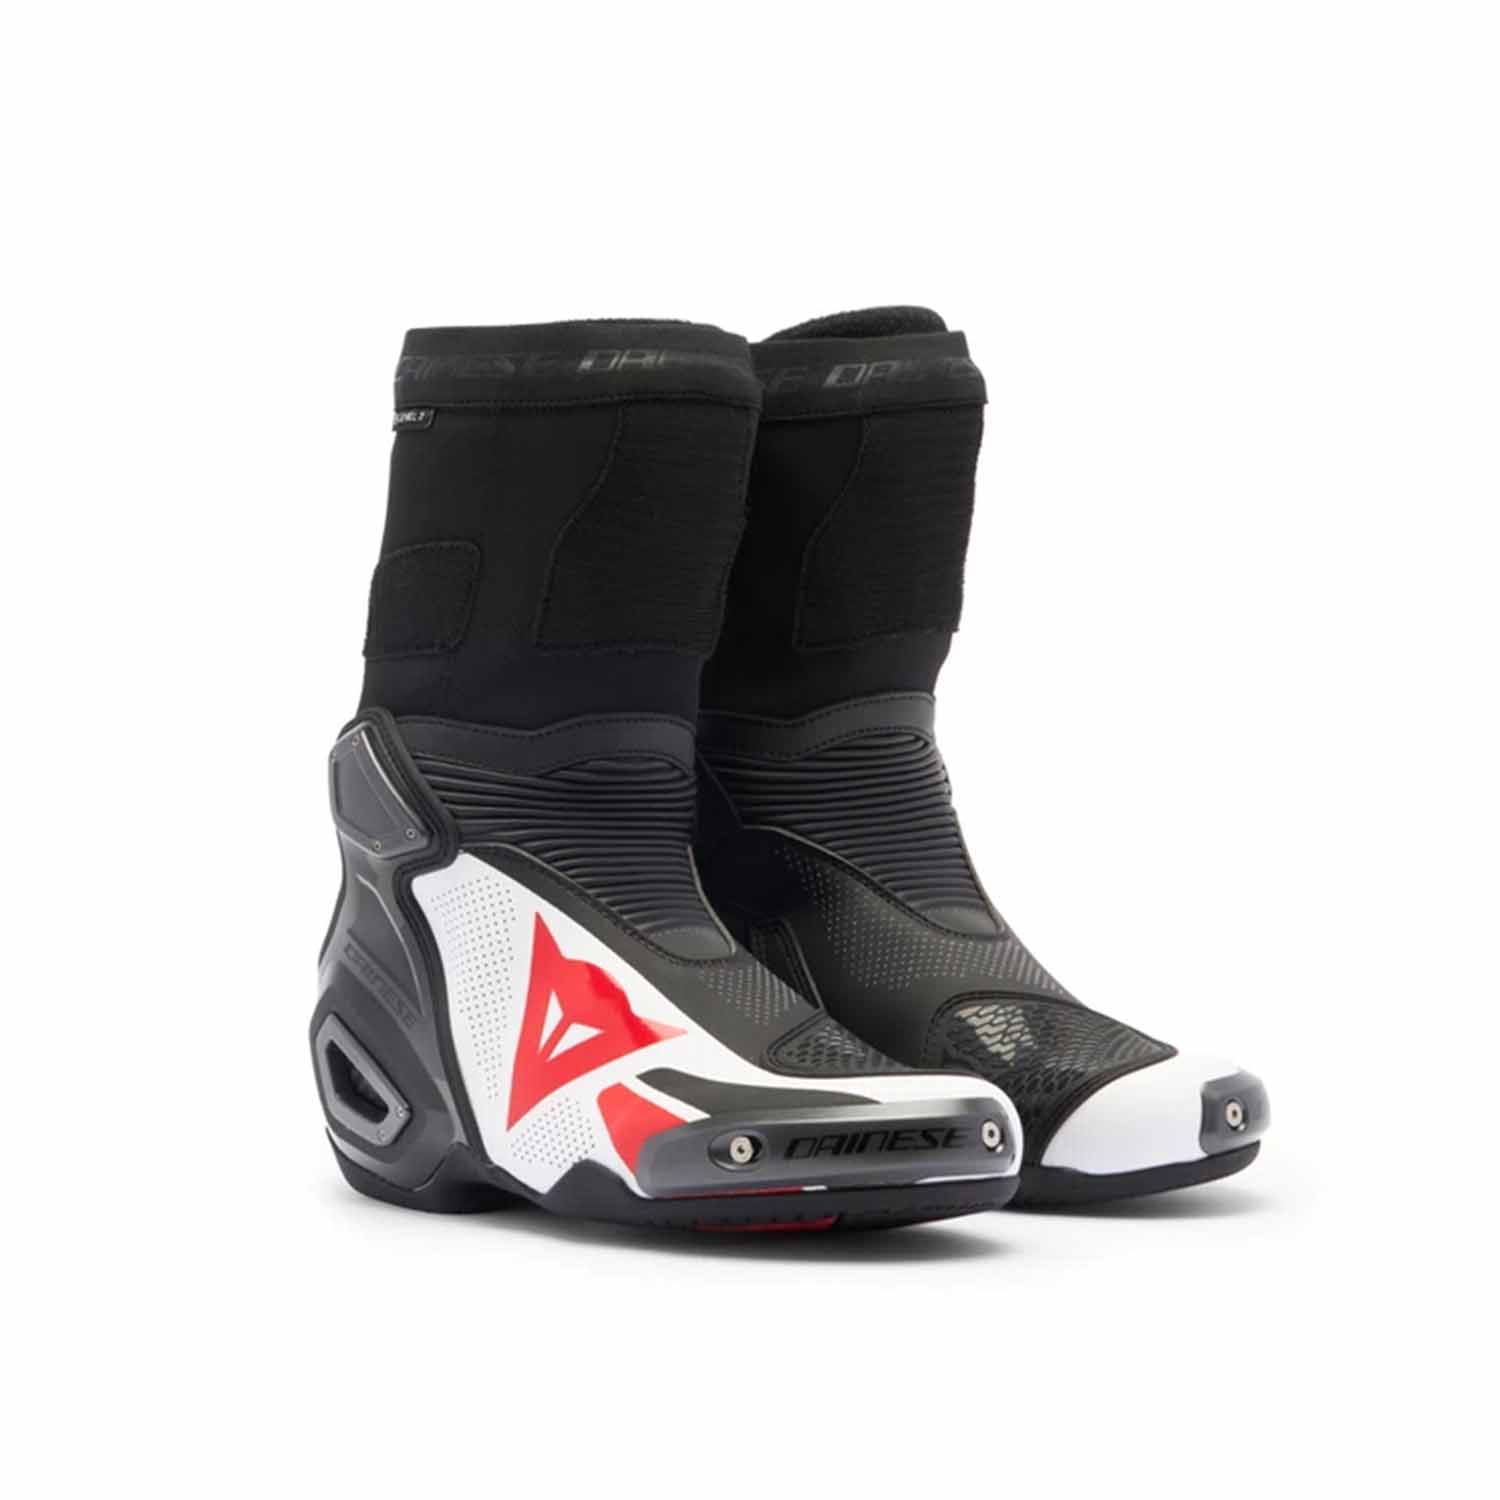 Image of Dainese Axial 2 Air Boots Black White Lava Red Size 41 ID 8051019739827